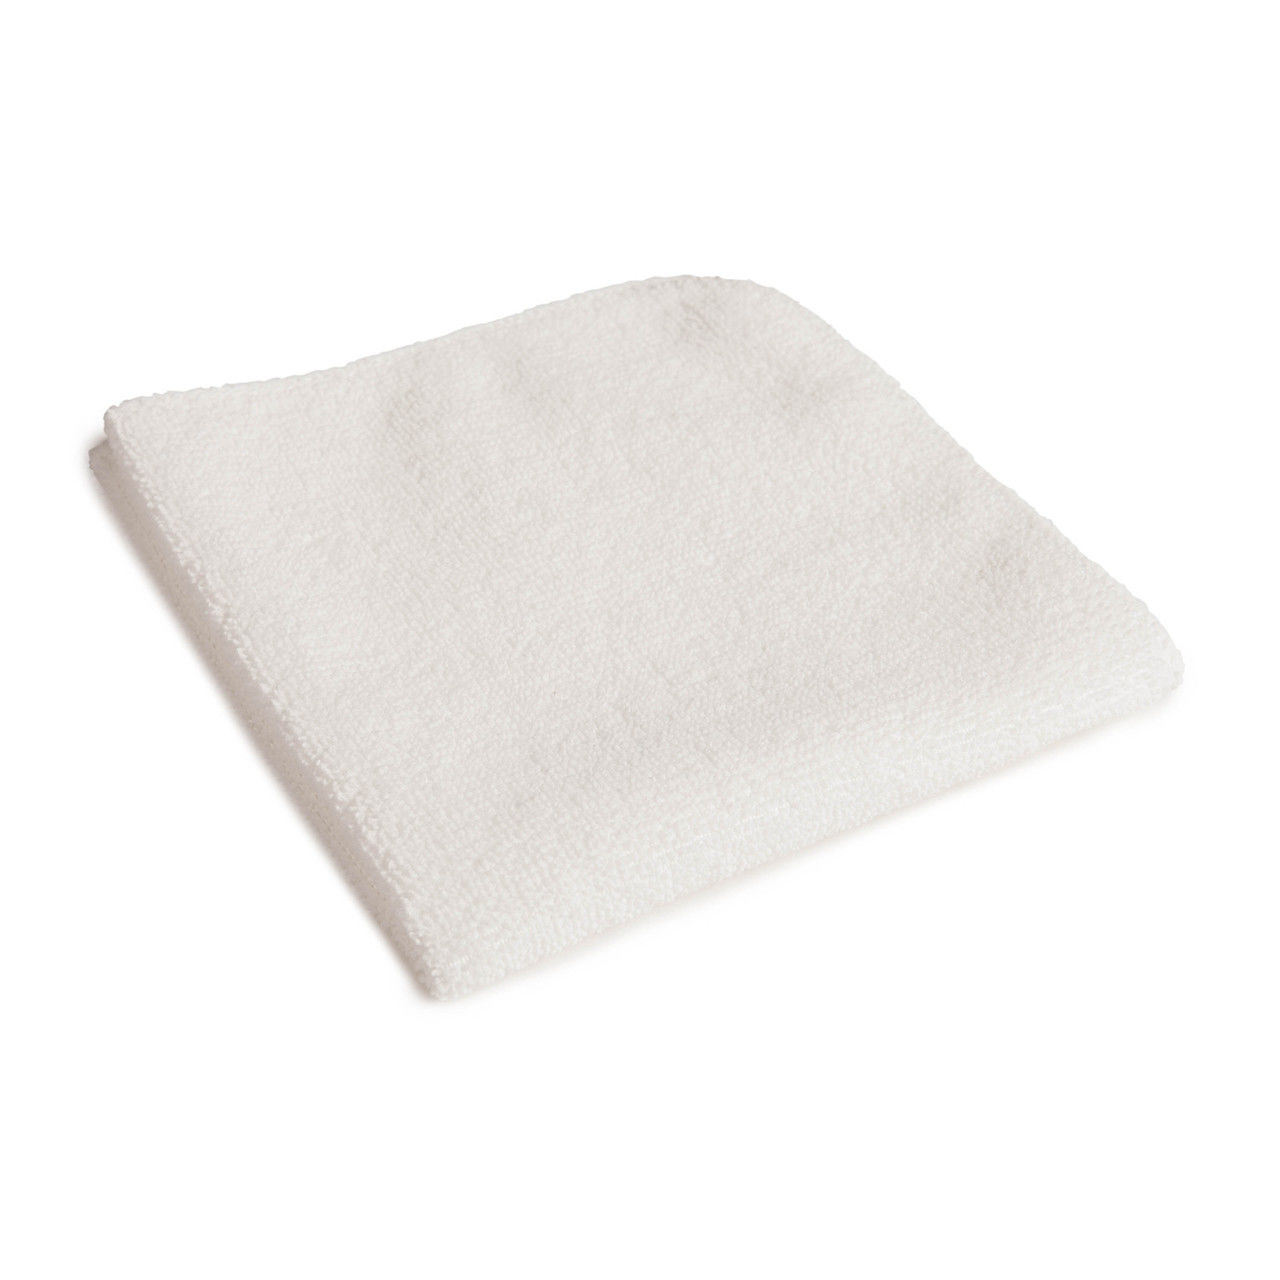 How effective are Dairy Towel Washcloths, as dairy towels, at eliminating bacteria?